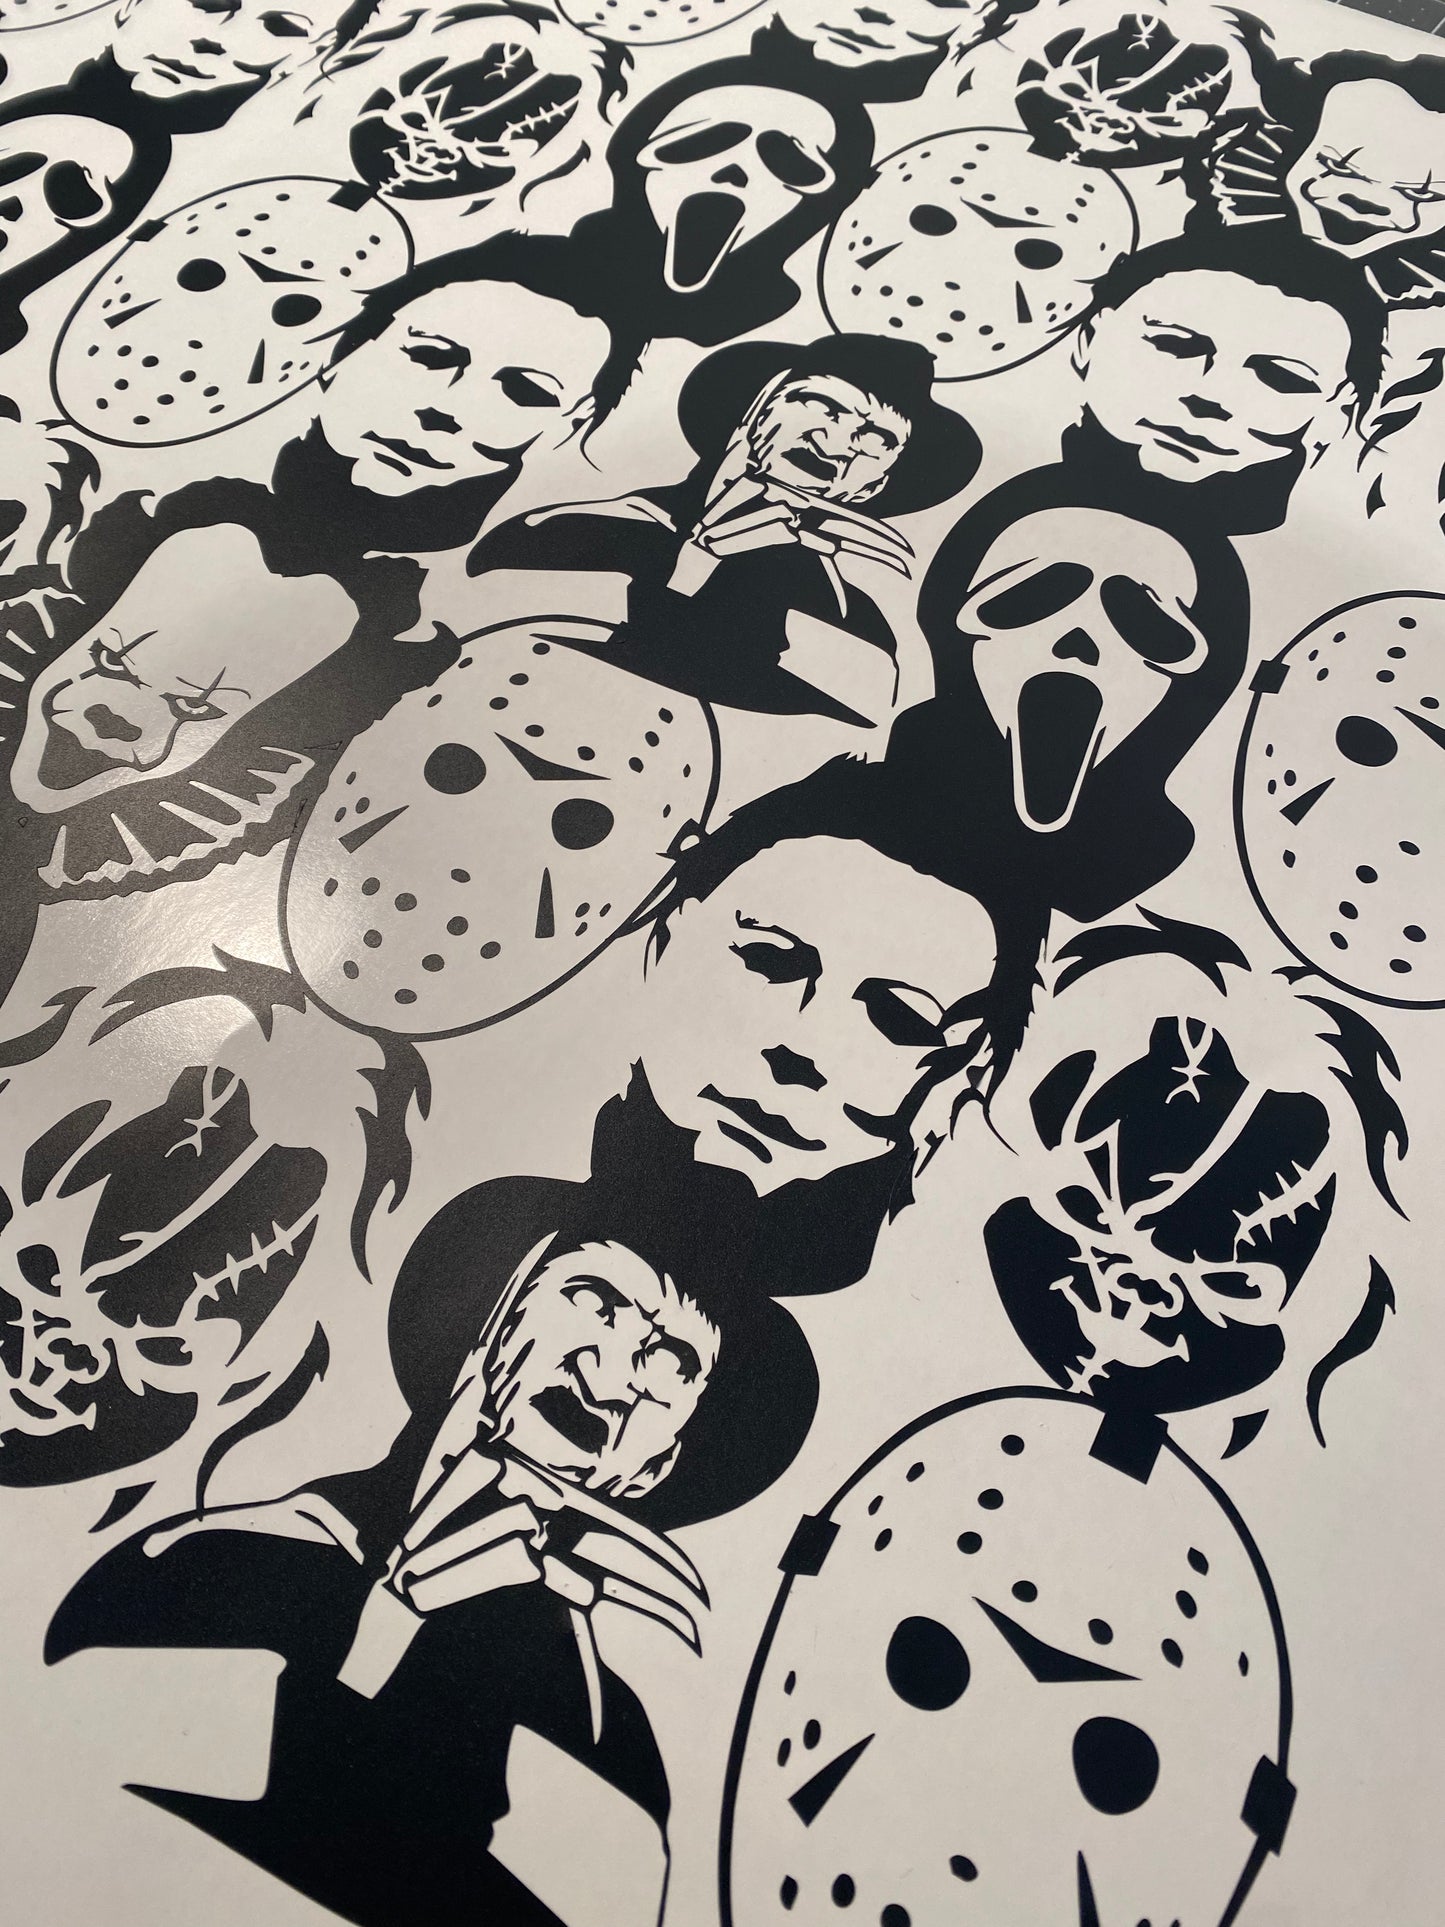 Horror Characters Car Decal (3 WEEKS OUT)